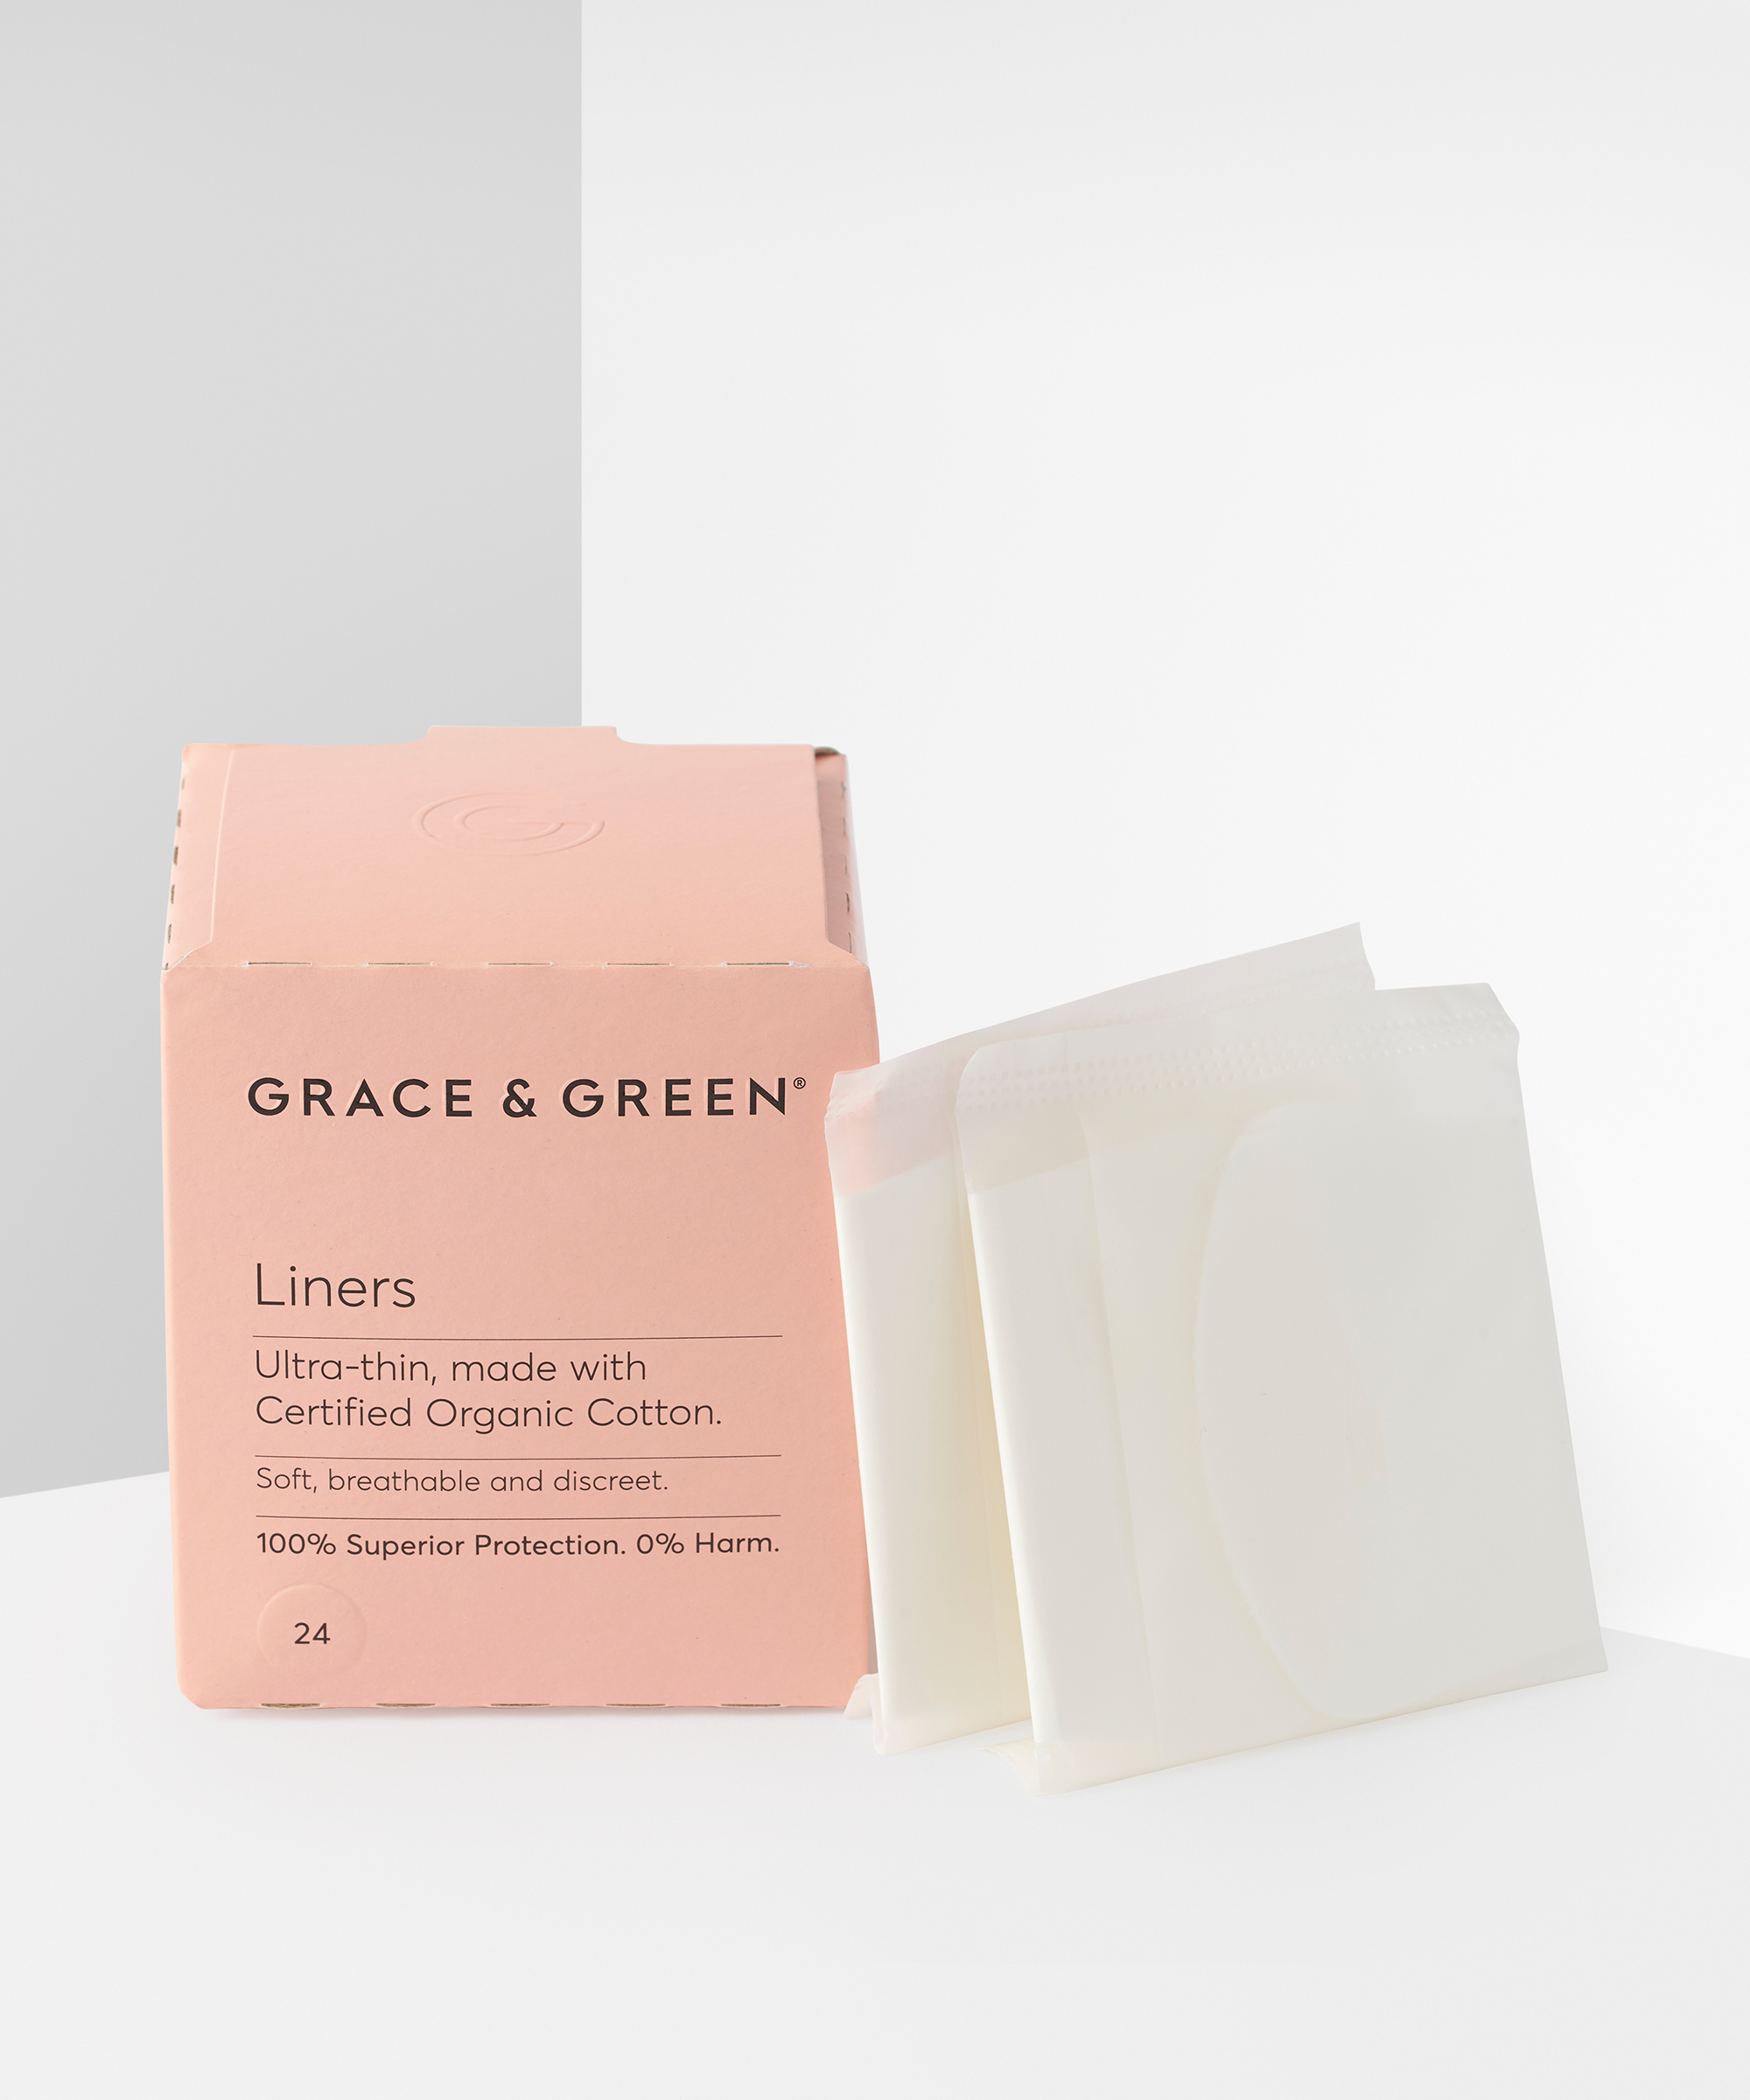 Grace & Green Liners